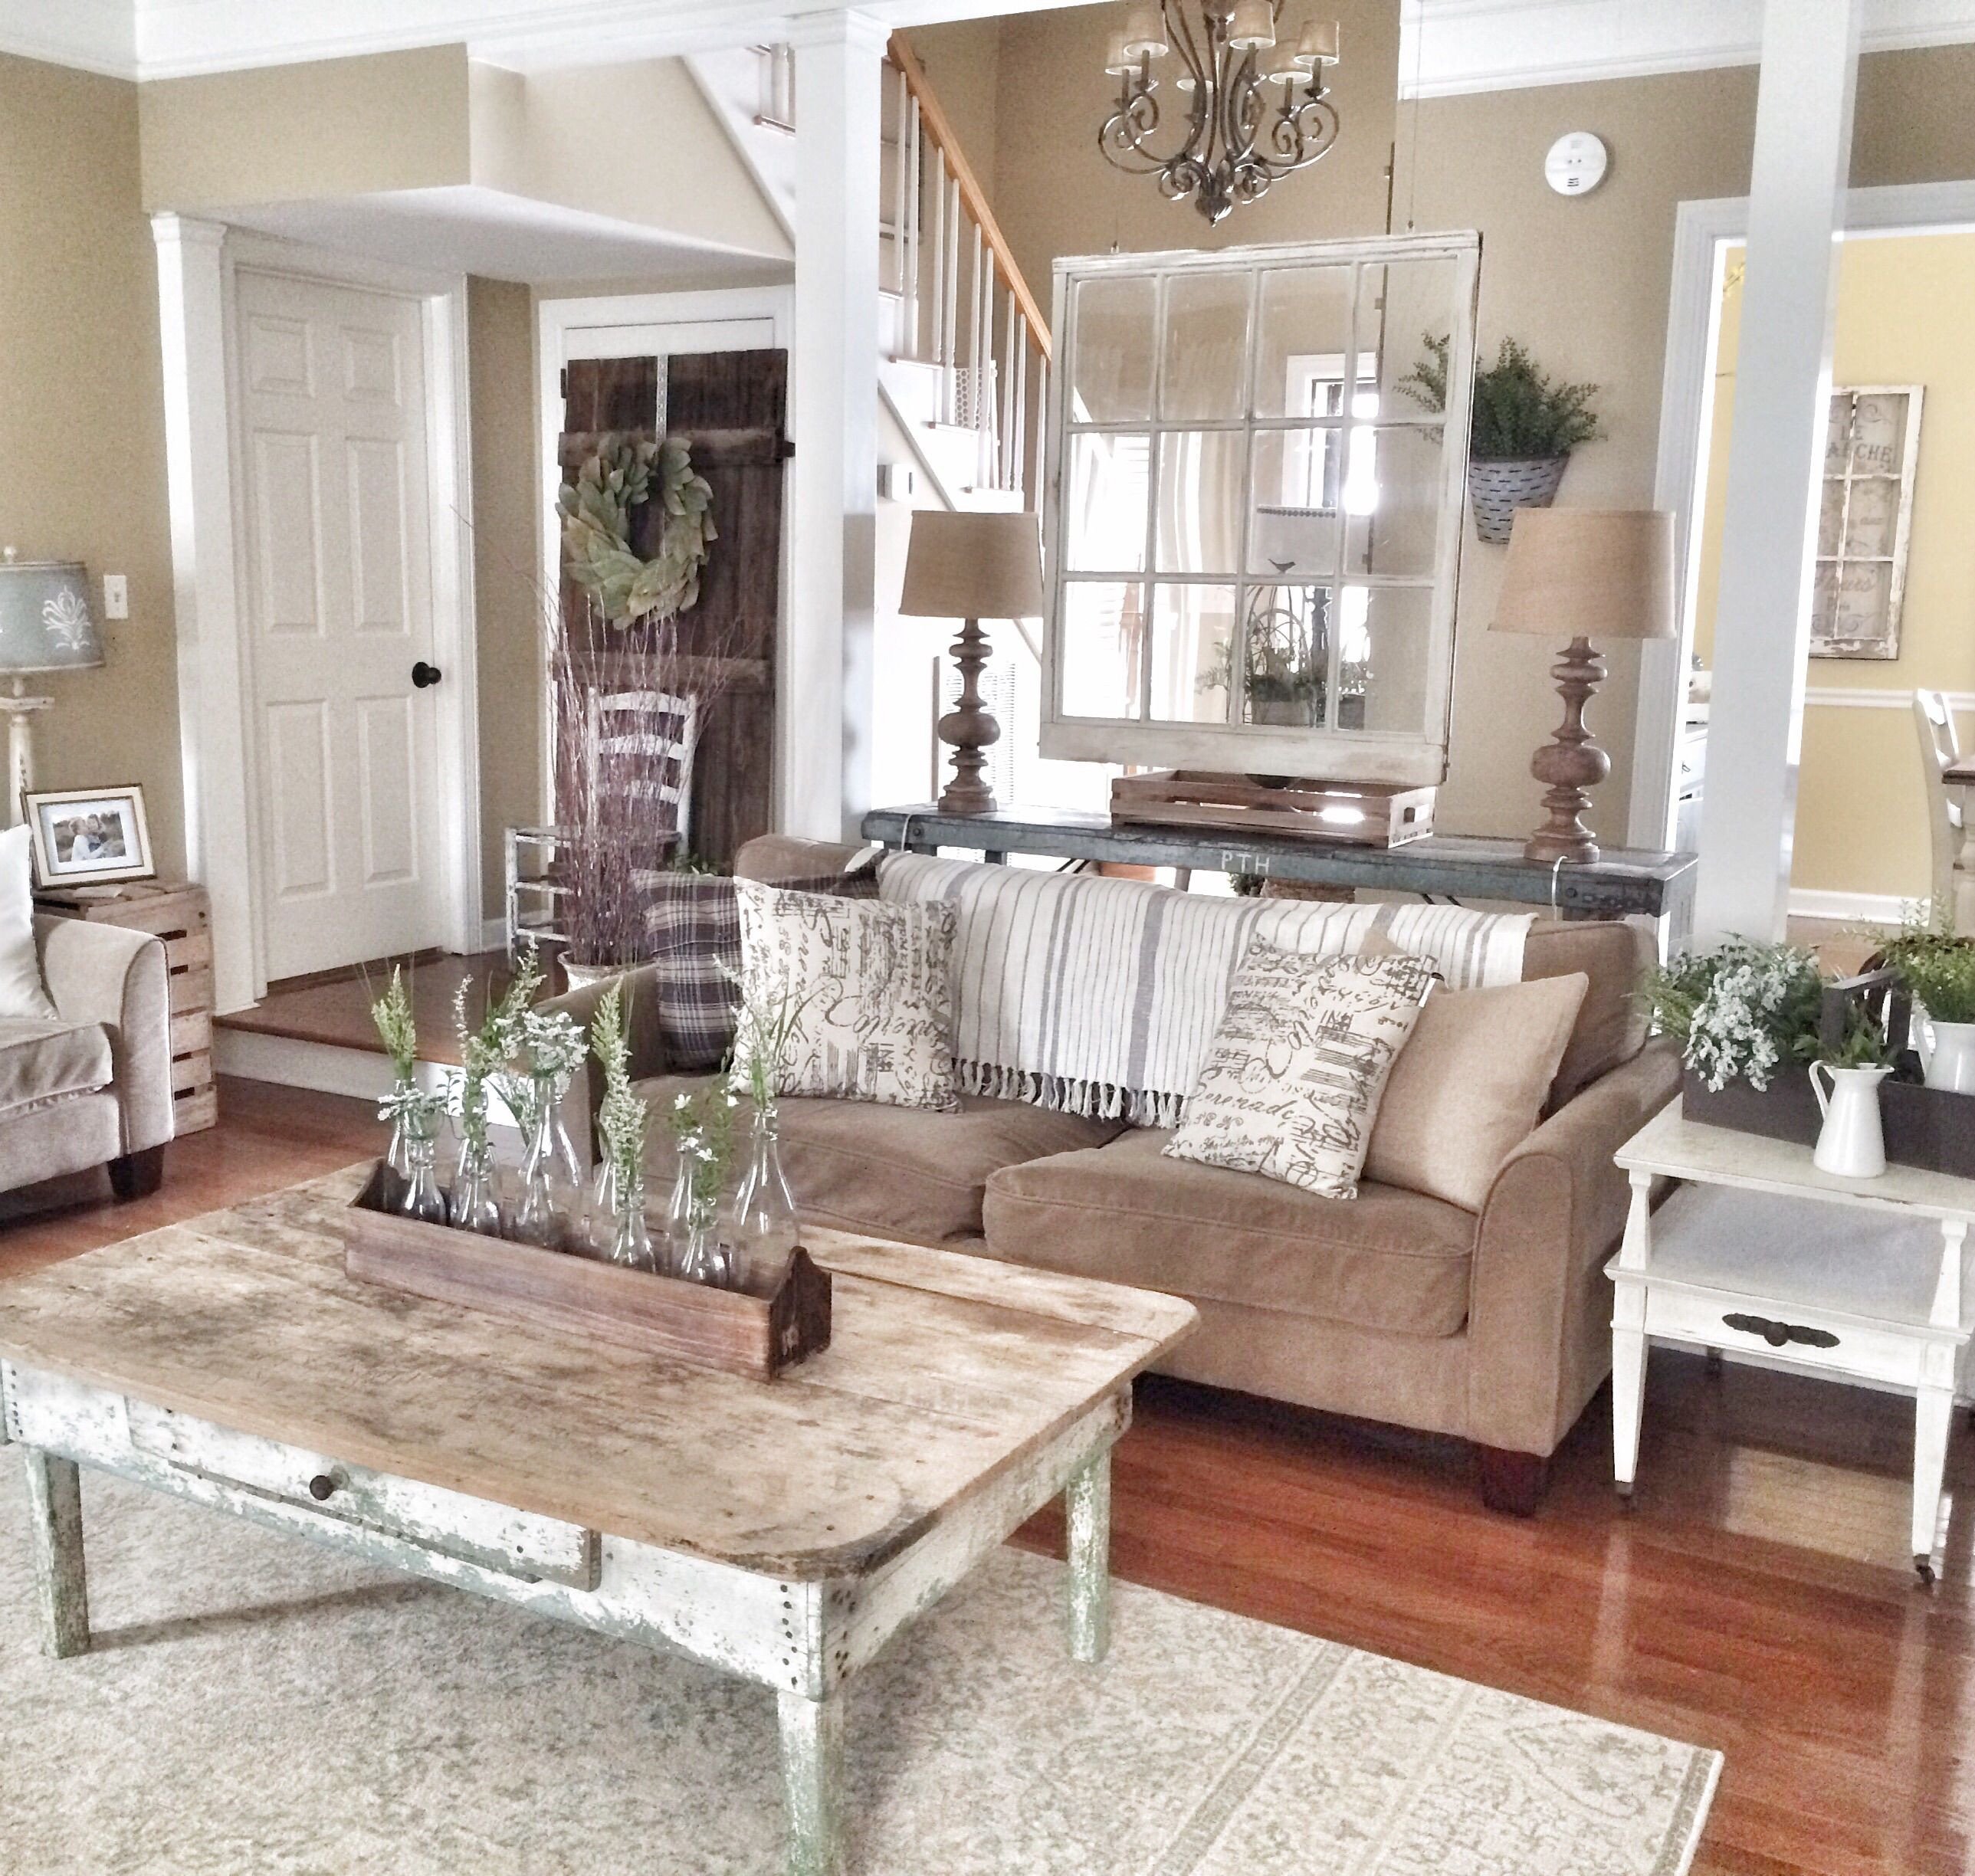 Rustic Chic Decor Living Room Luxury Chic Details for Cozy Rustic Living Room Décor